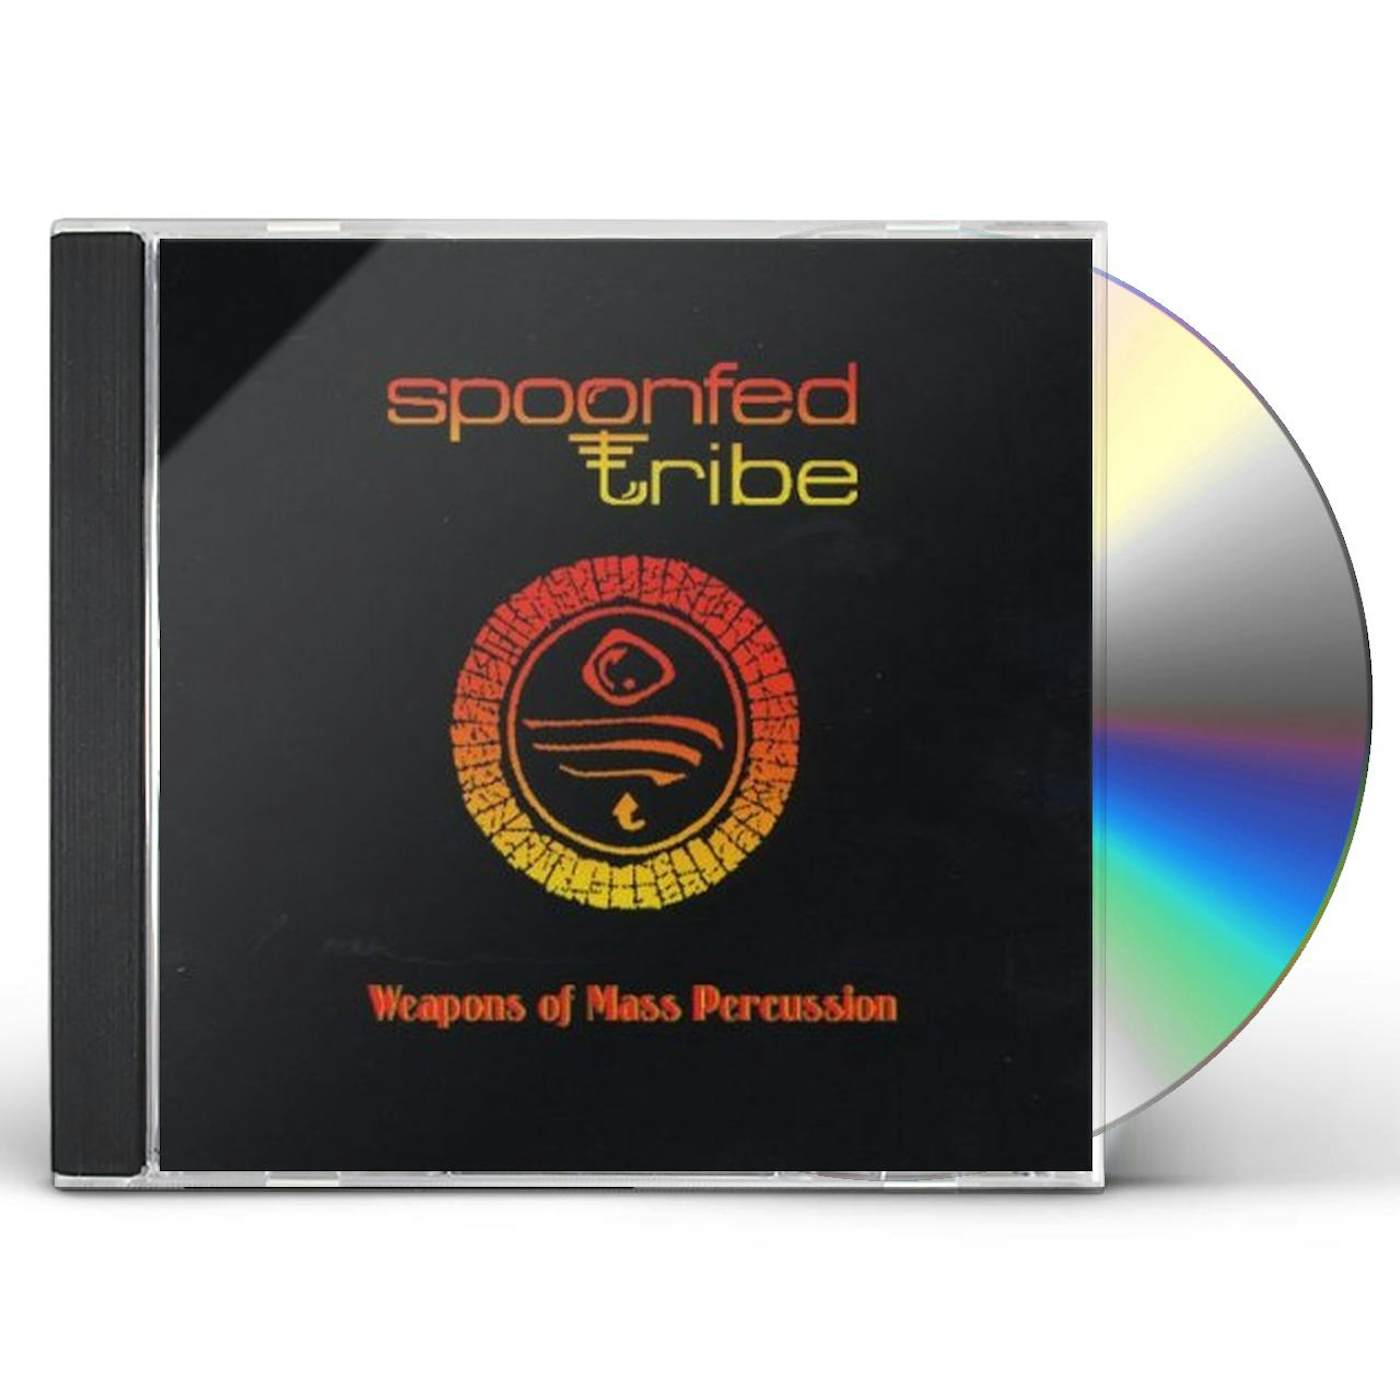 Spoonfed Tribe WEAPONS OF MASS PERCUSSION CD